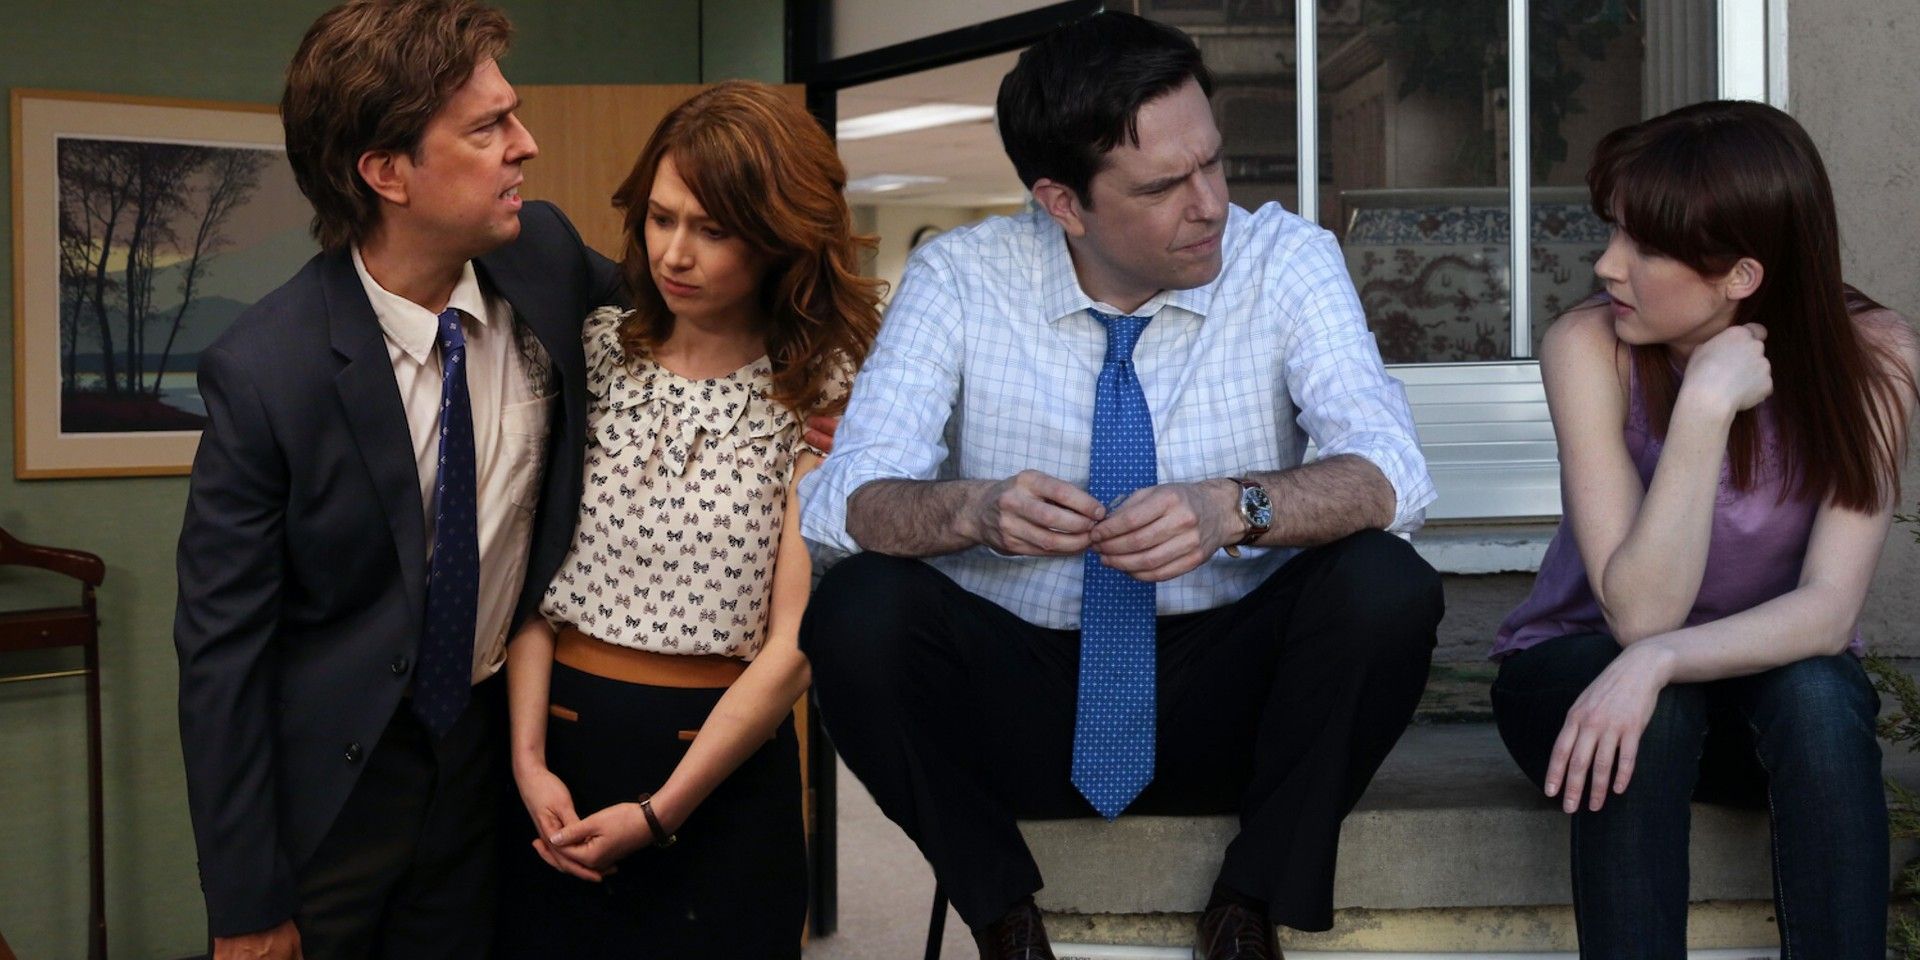 Why Andy & Erin's Relationship In The Office Never Made Any Sense